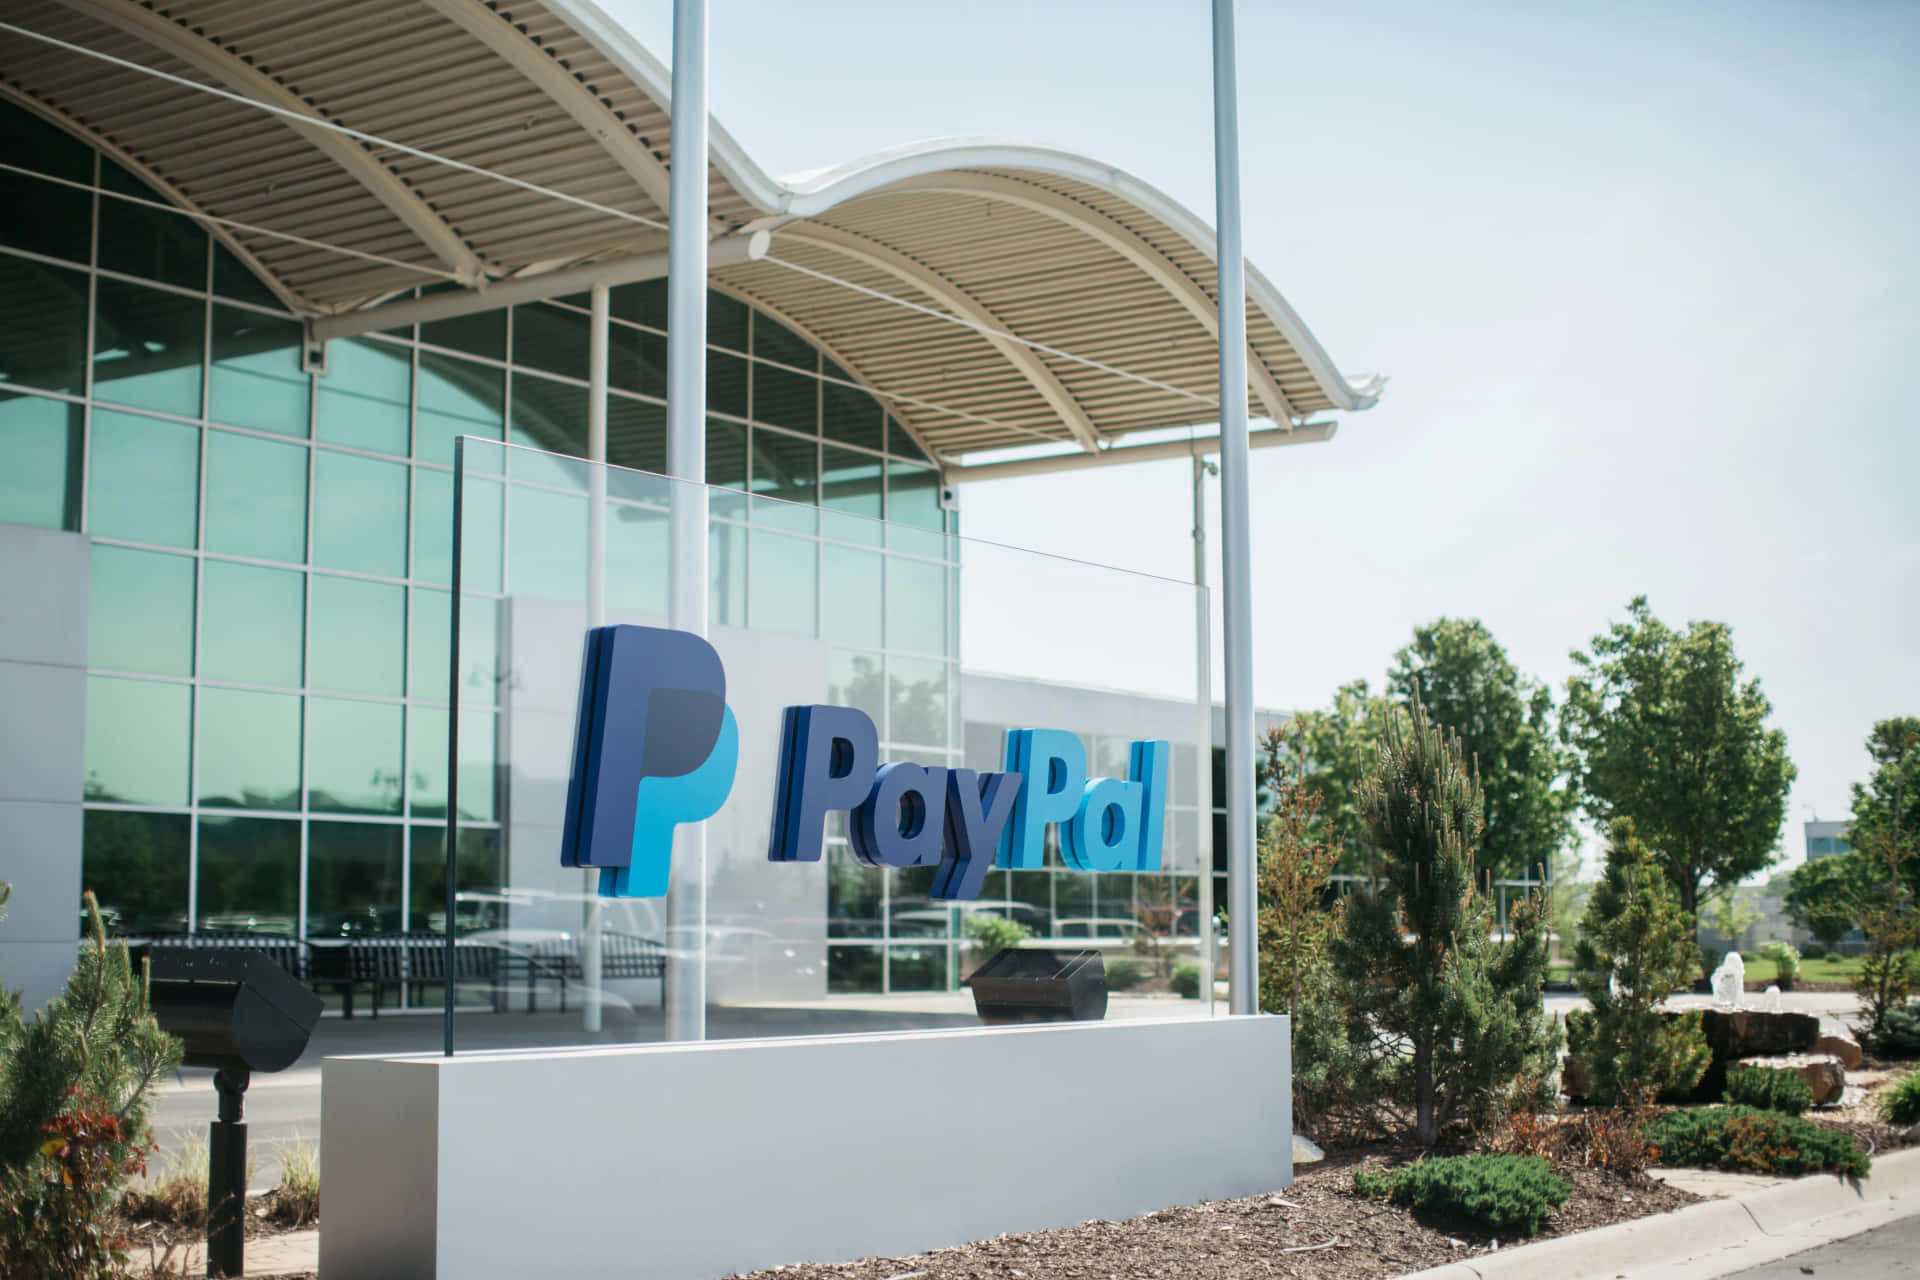 Paypal's Headquarters In A City